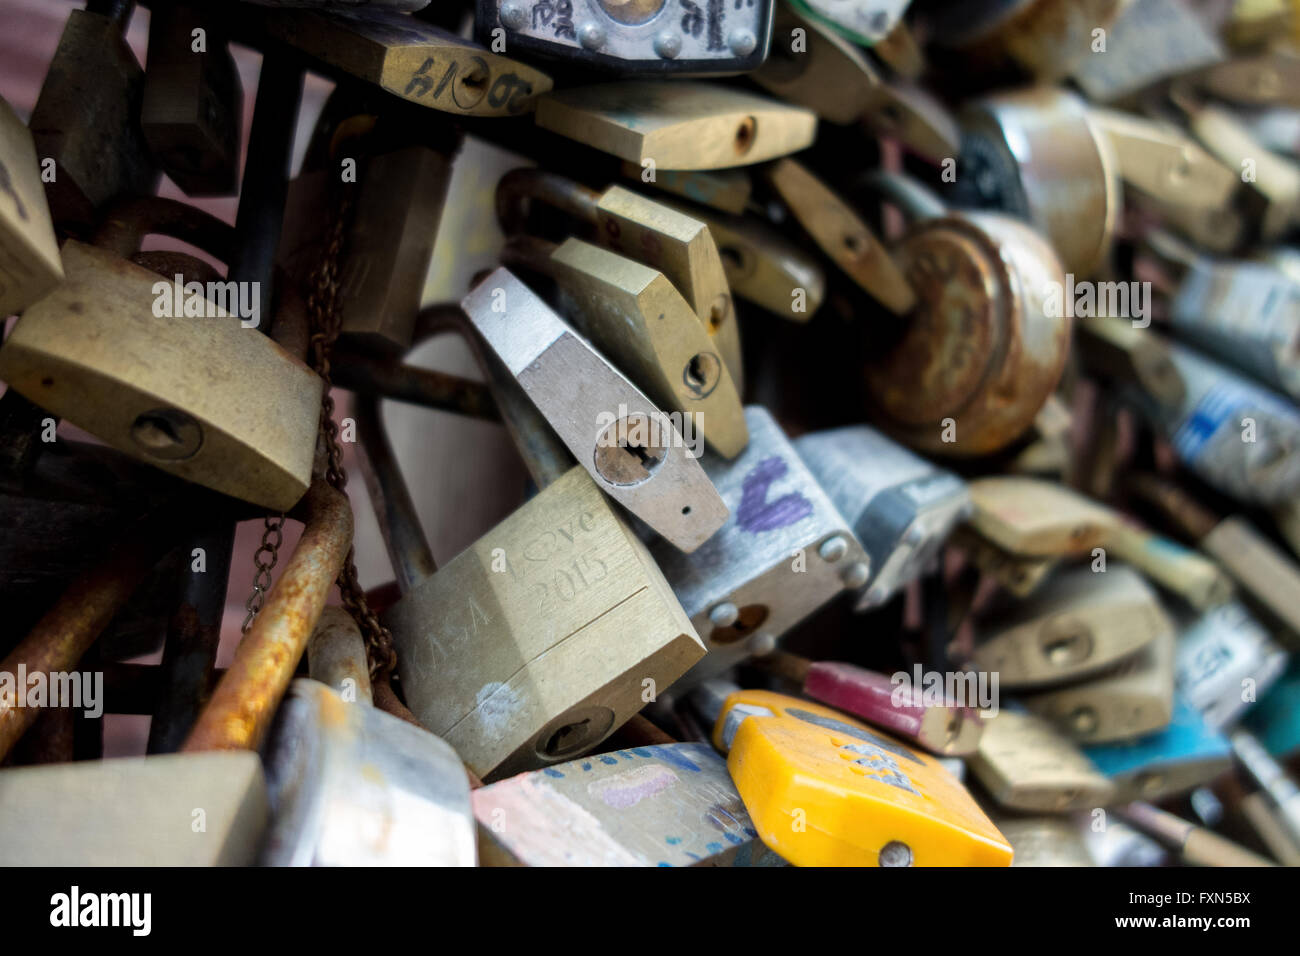 Romance - Love locks on fencing bunched together for love and relationship concept. Note that all logos have been removed. Stock Photo